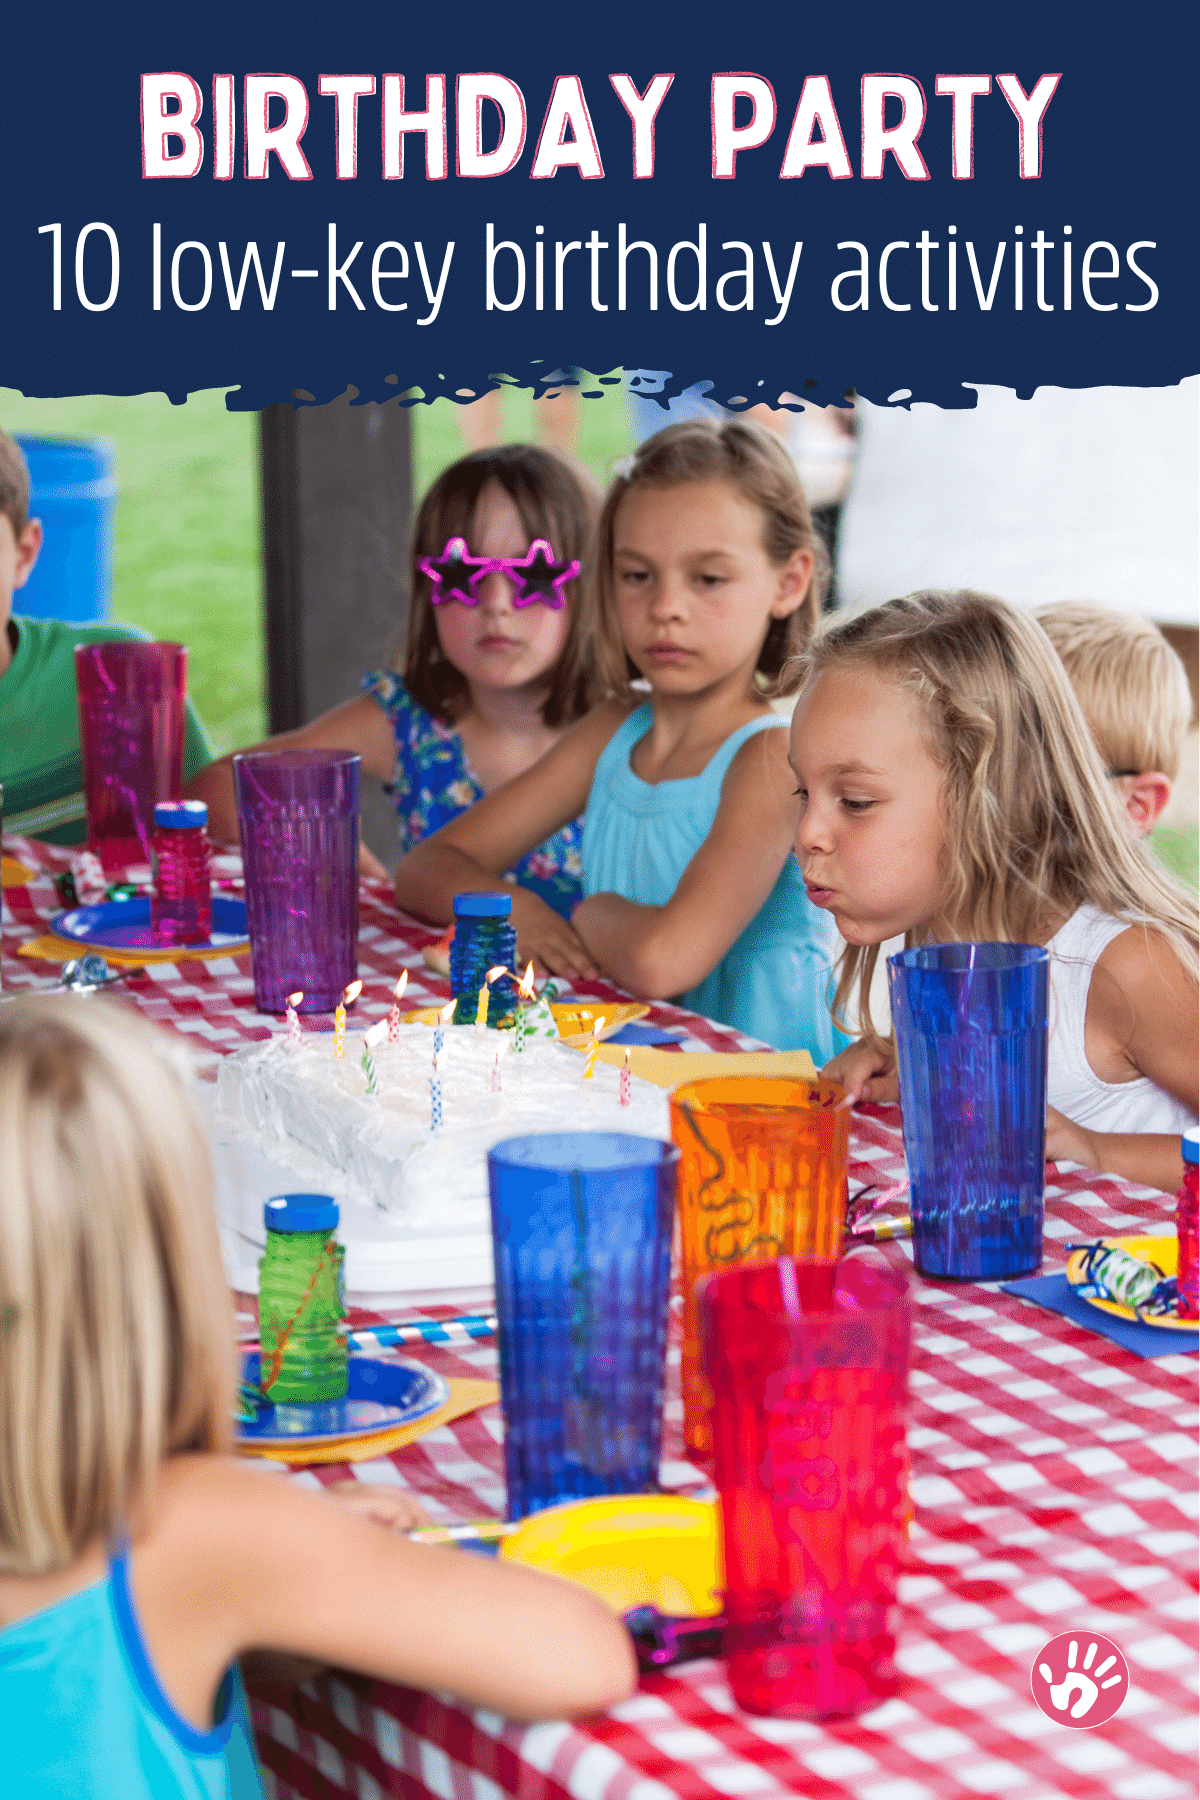 Birthday Party Activities for Adults: Give Your Bash a Boost!